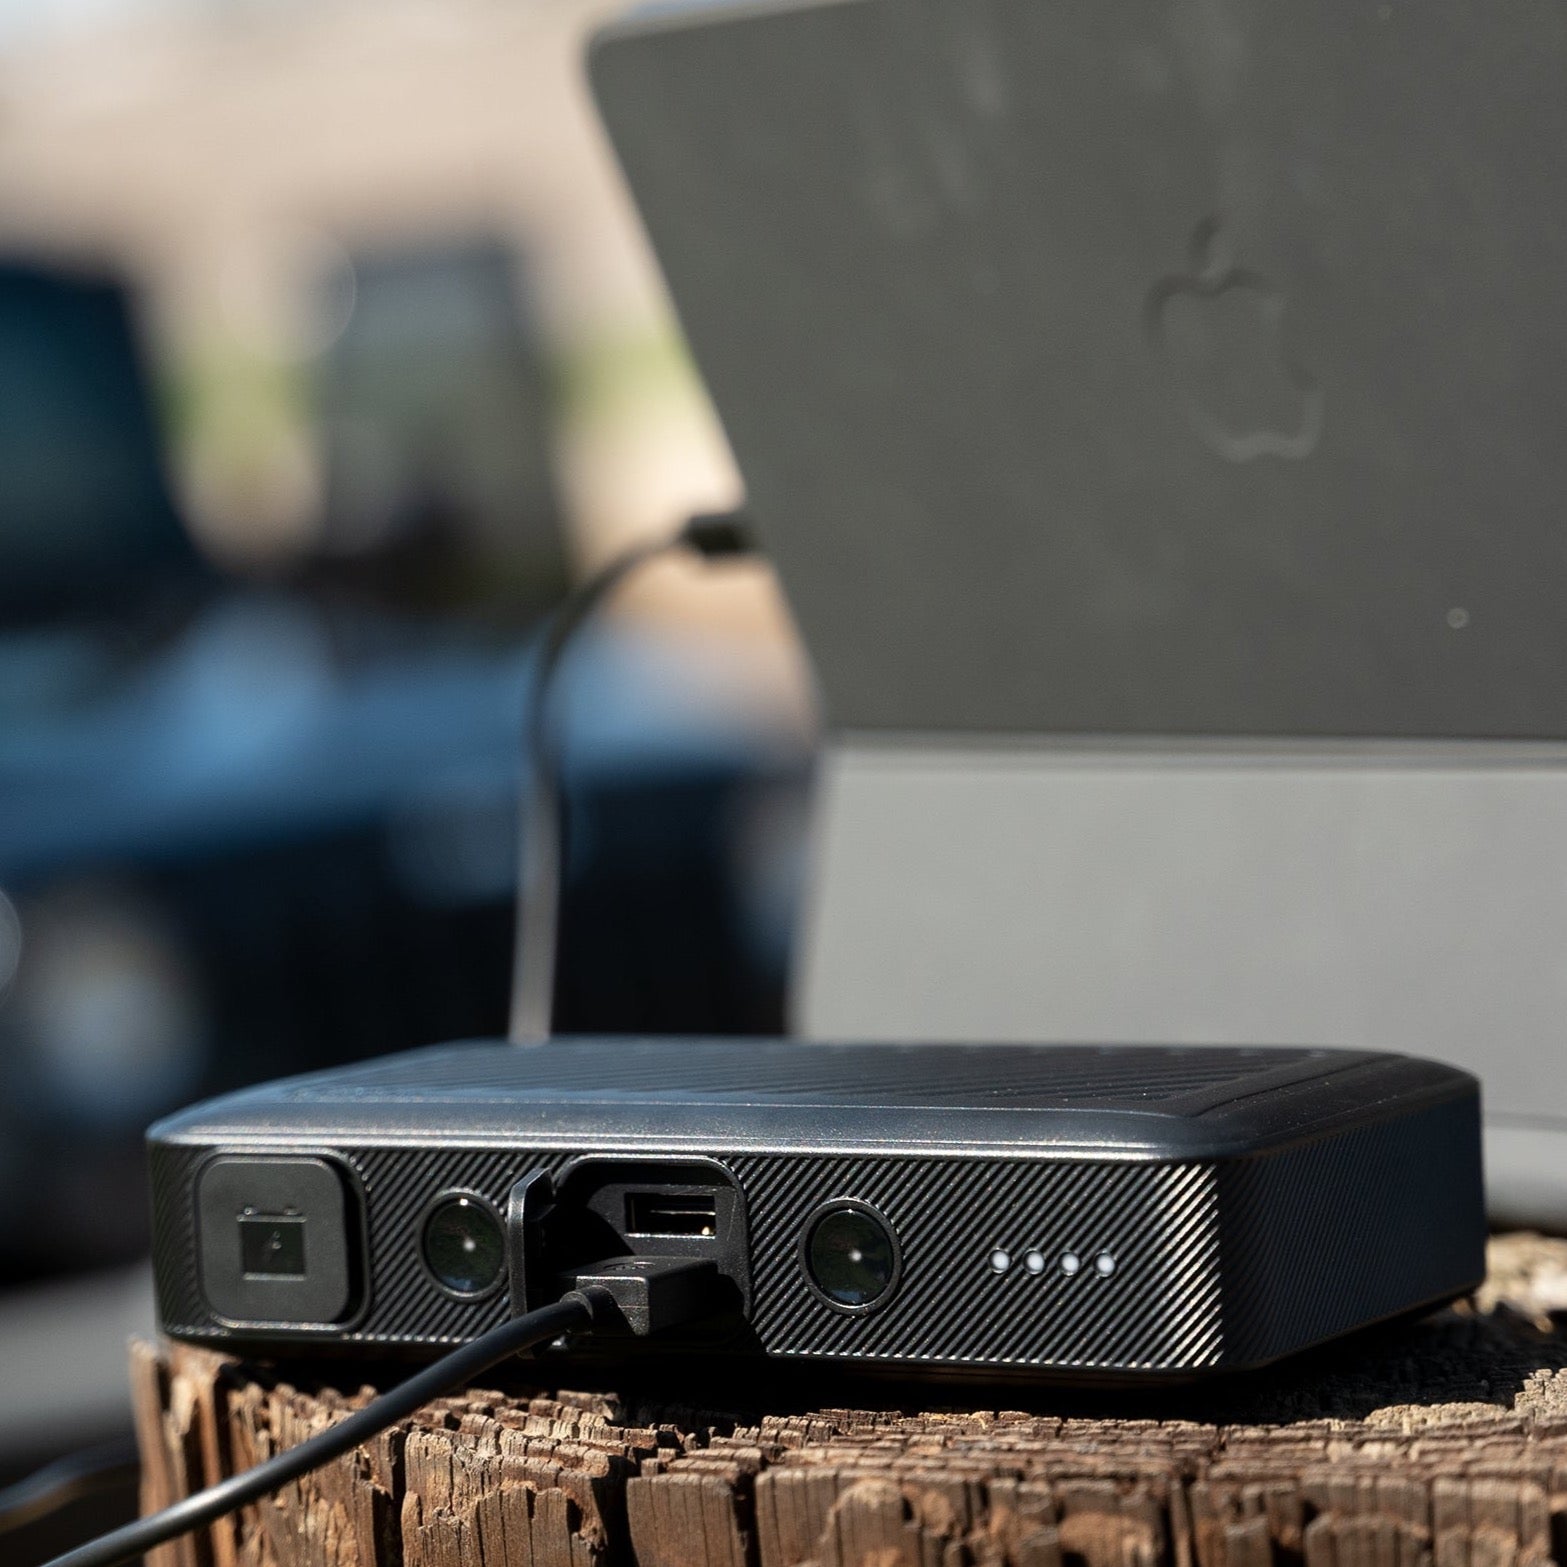 Mophie powerstation go rugged compact - Storming Gravity